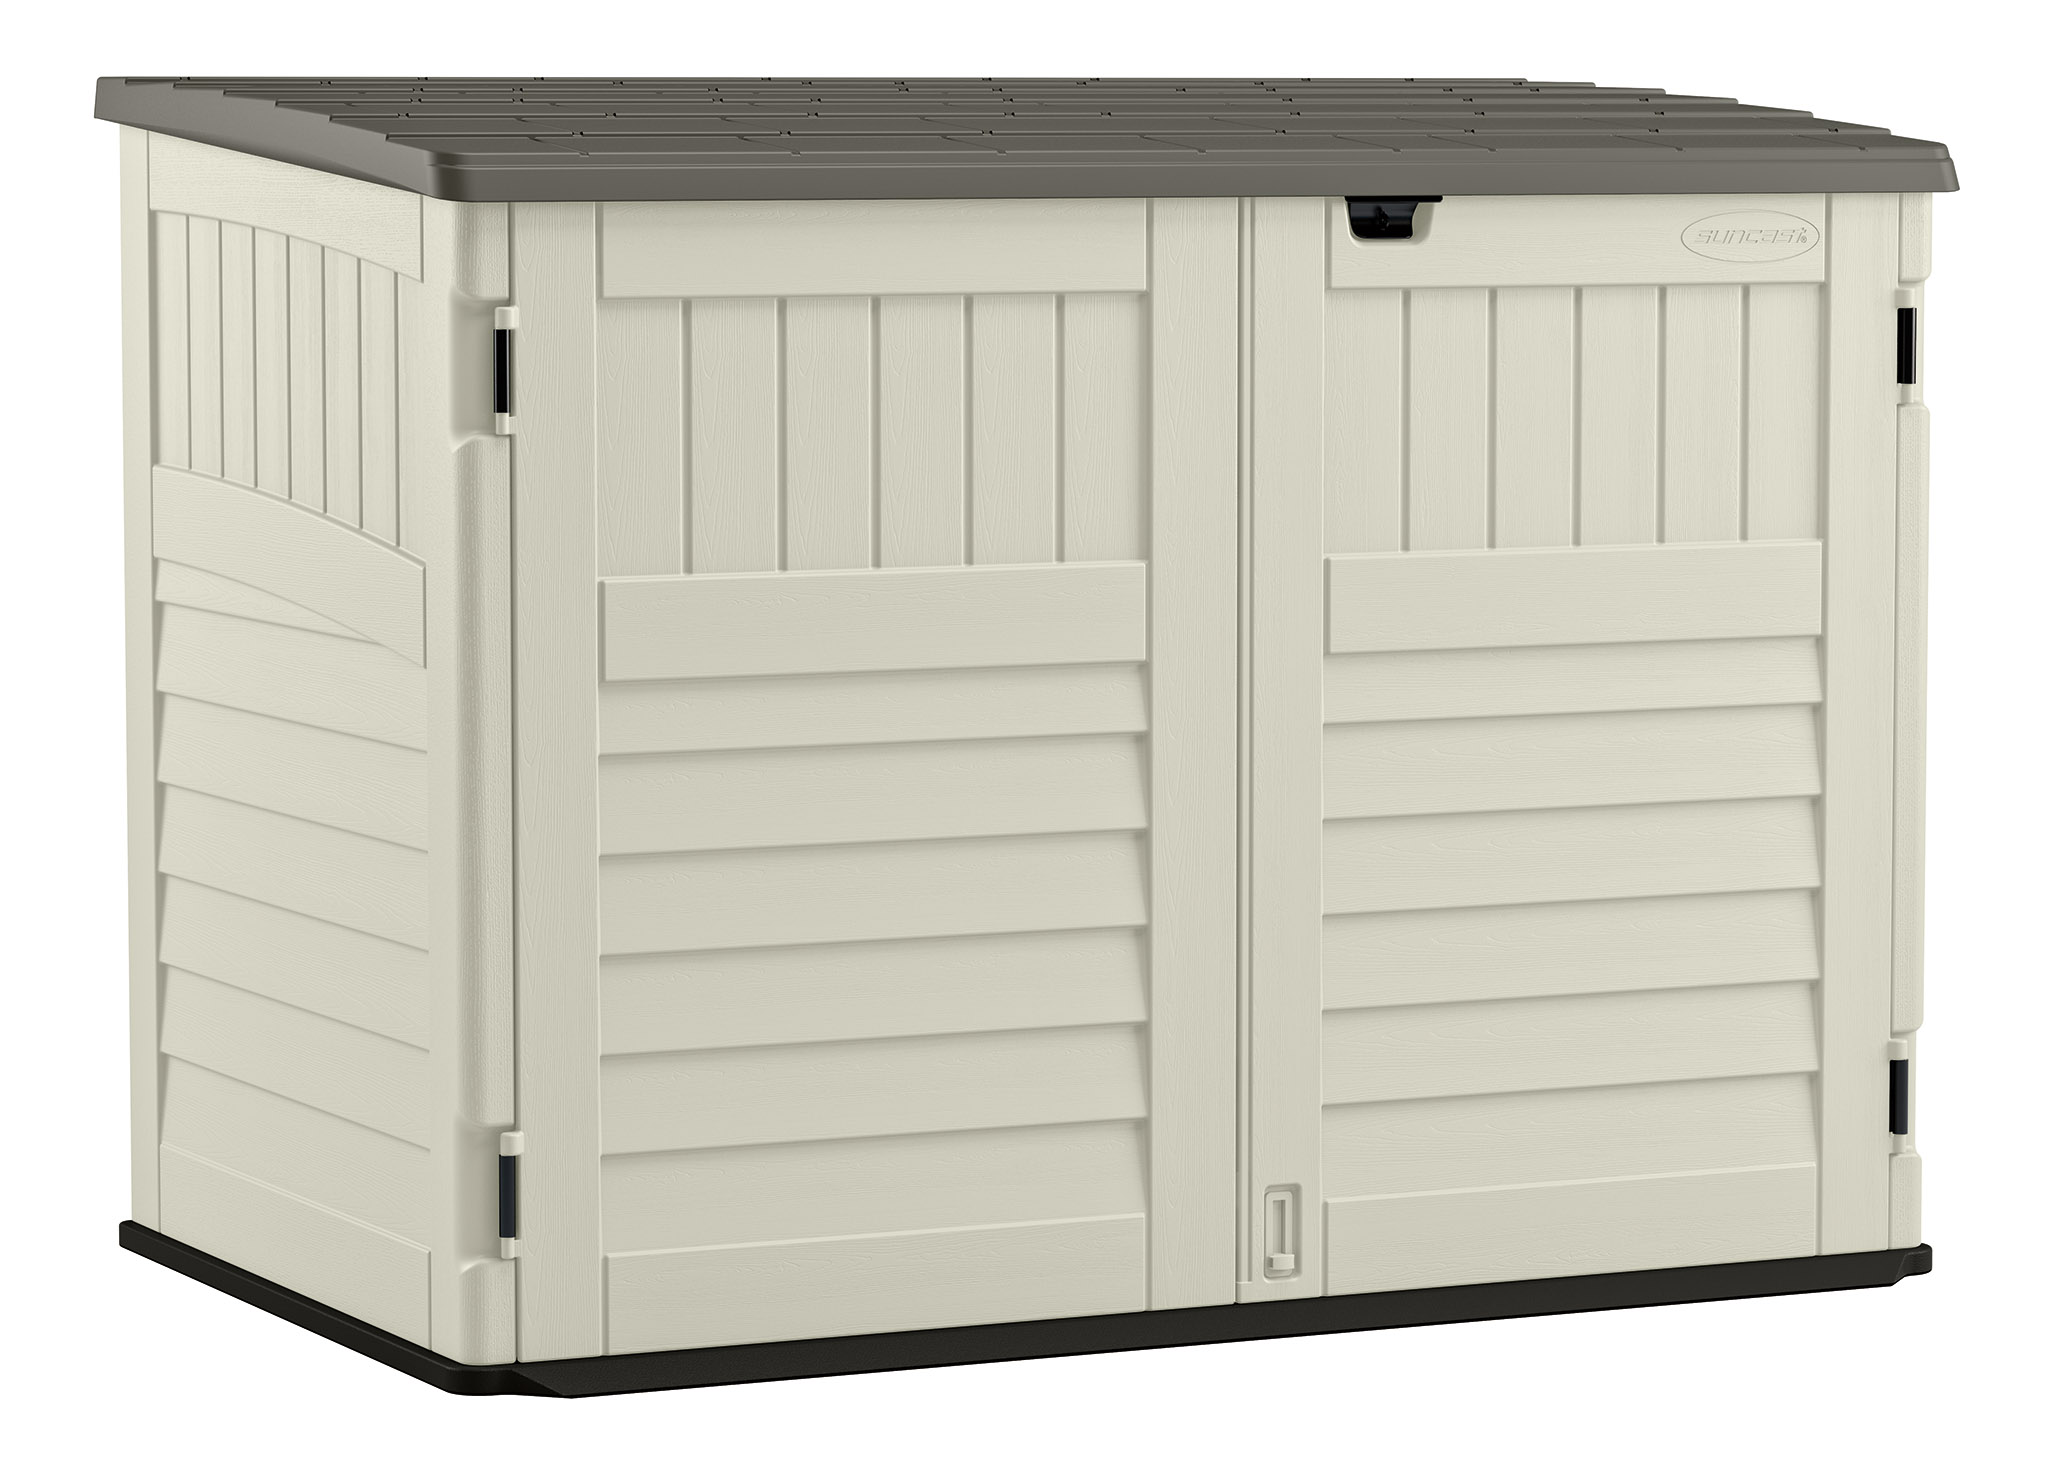 Suncast Plastic Storage Shed, Off-White and Gray, 44.25 in D x 52 in H x 70.5 in W - image 1 of 7